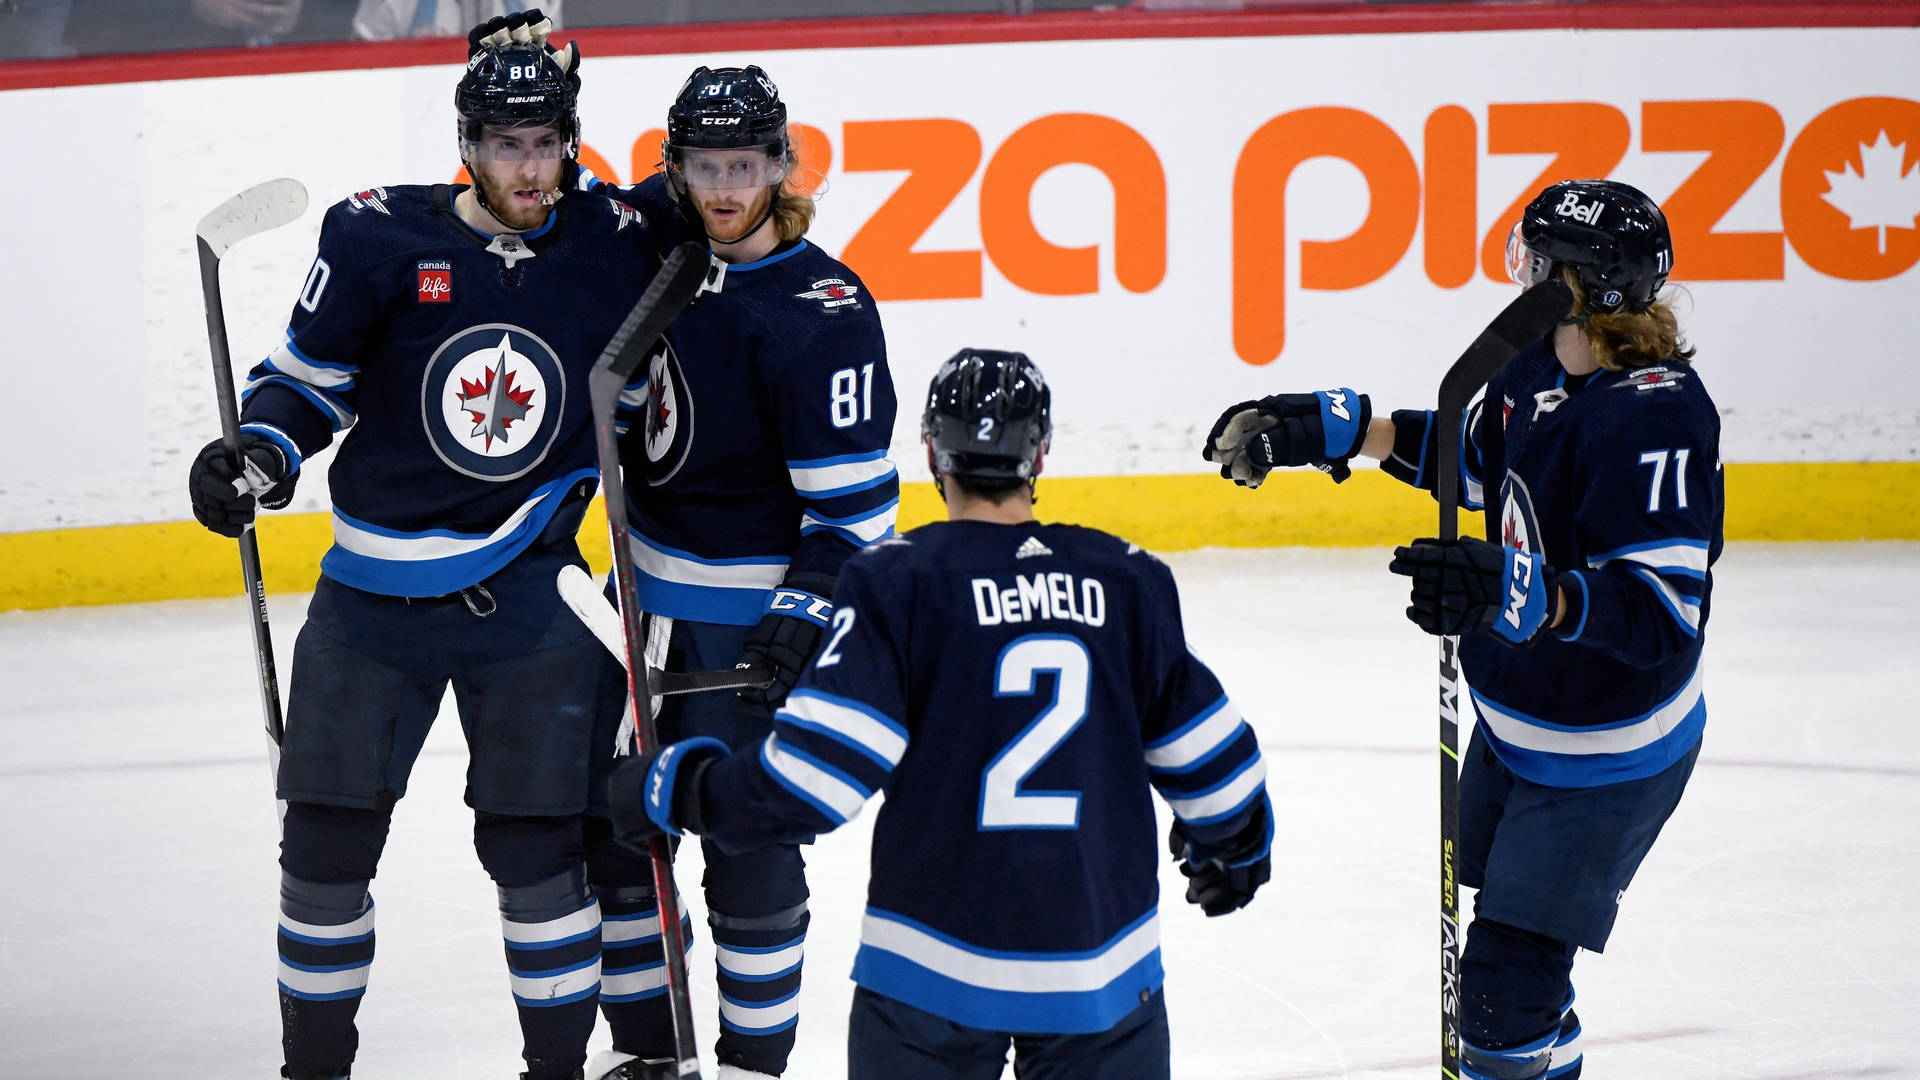 Winnipeg Jets Ice Hockey Players Kyle Connor And Teammates Wallpaper